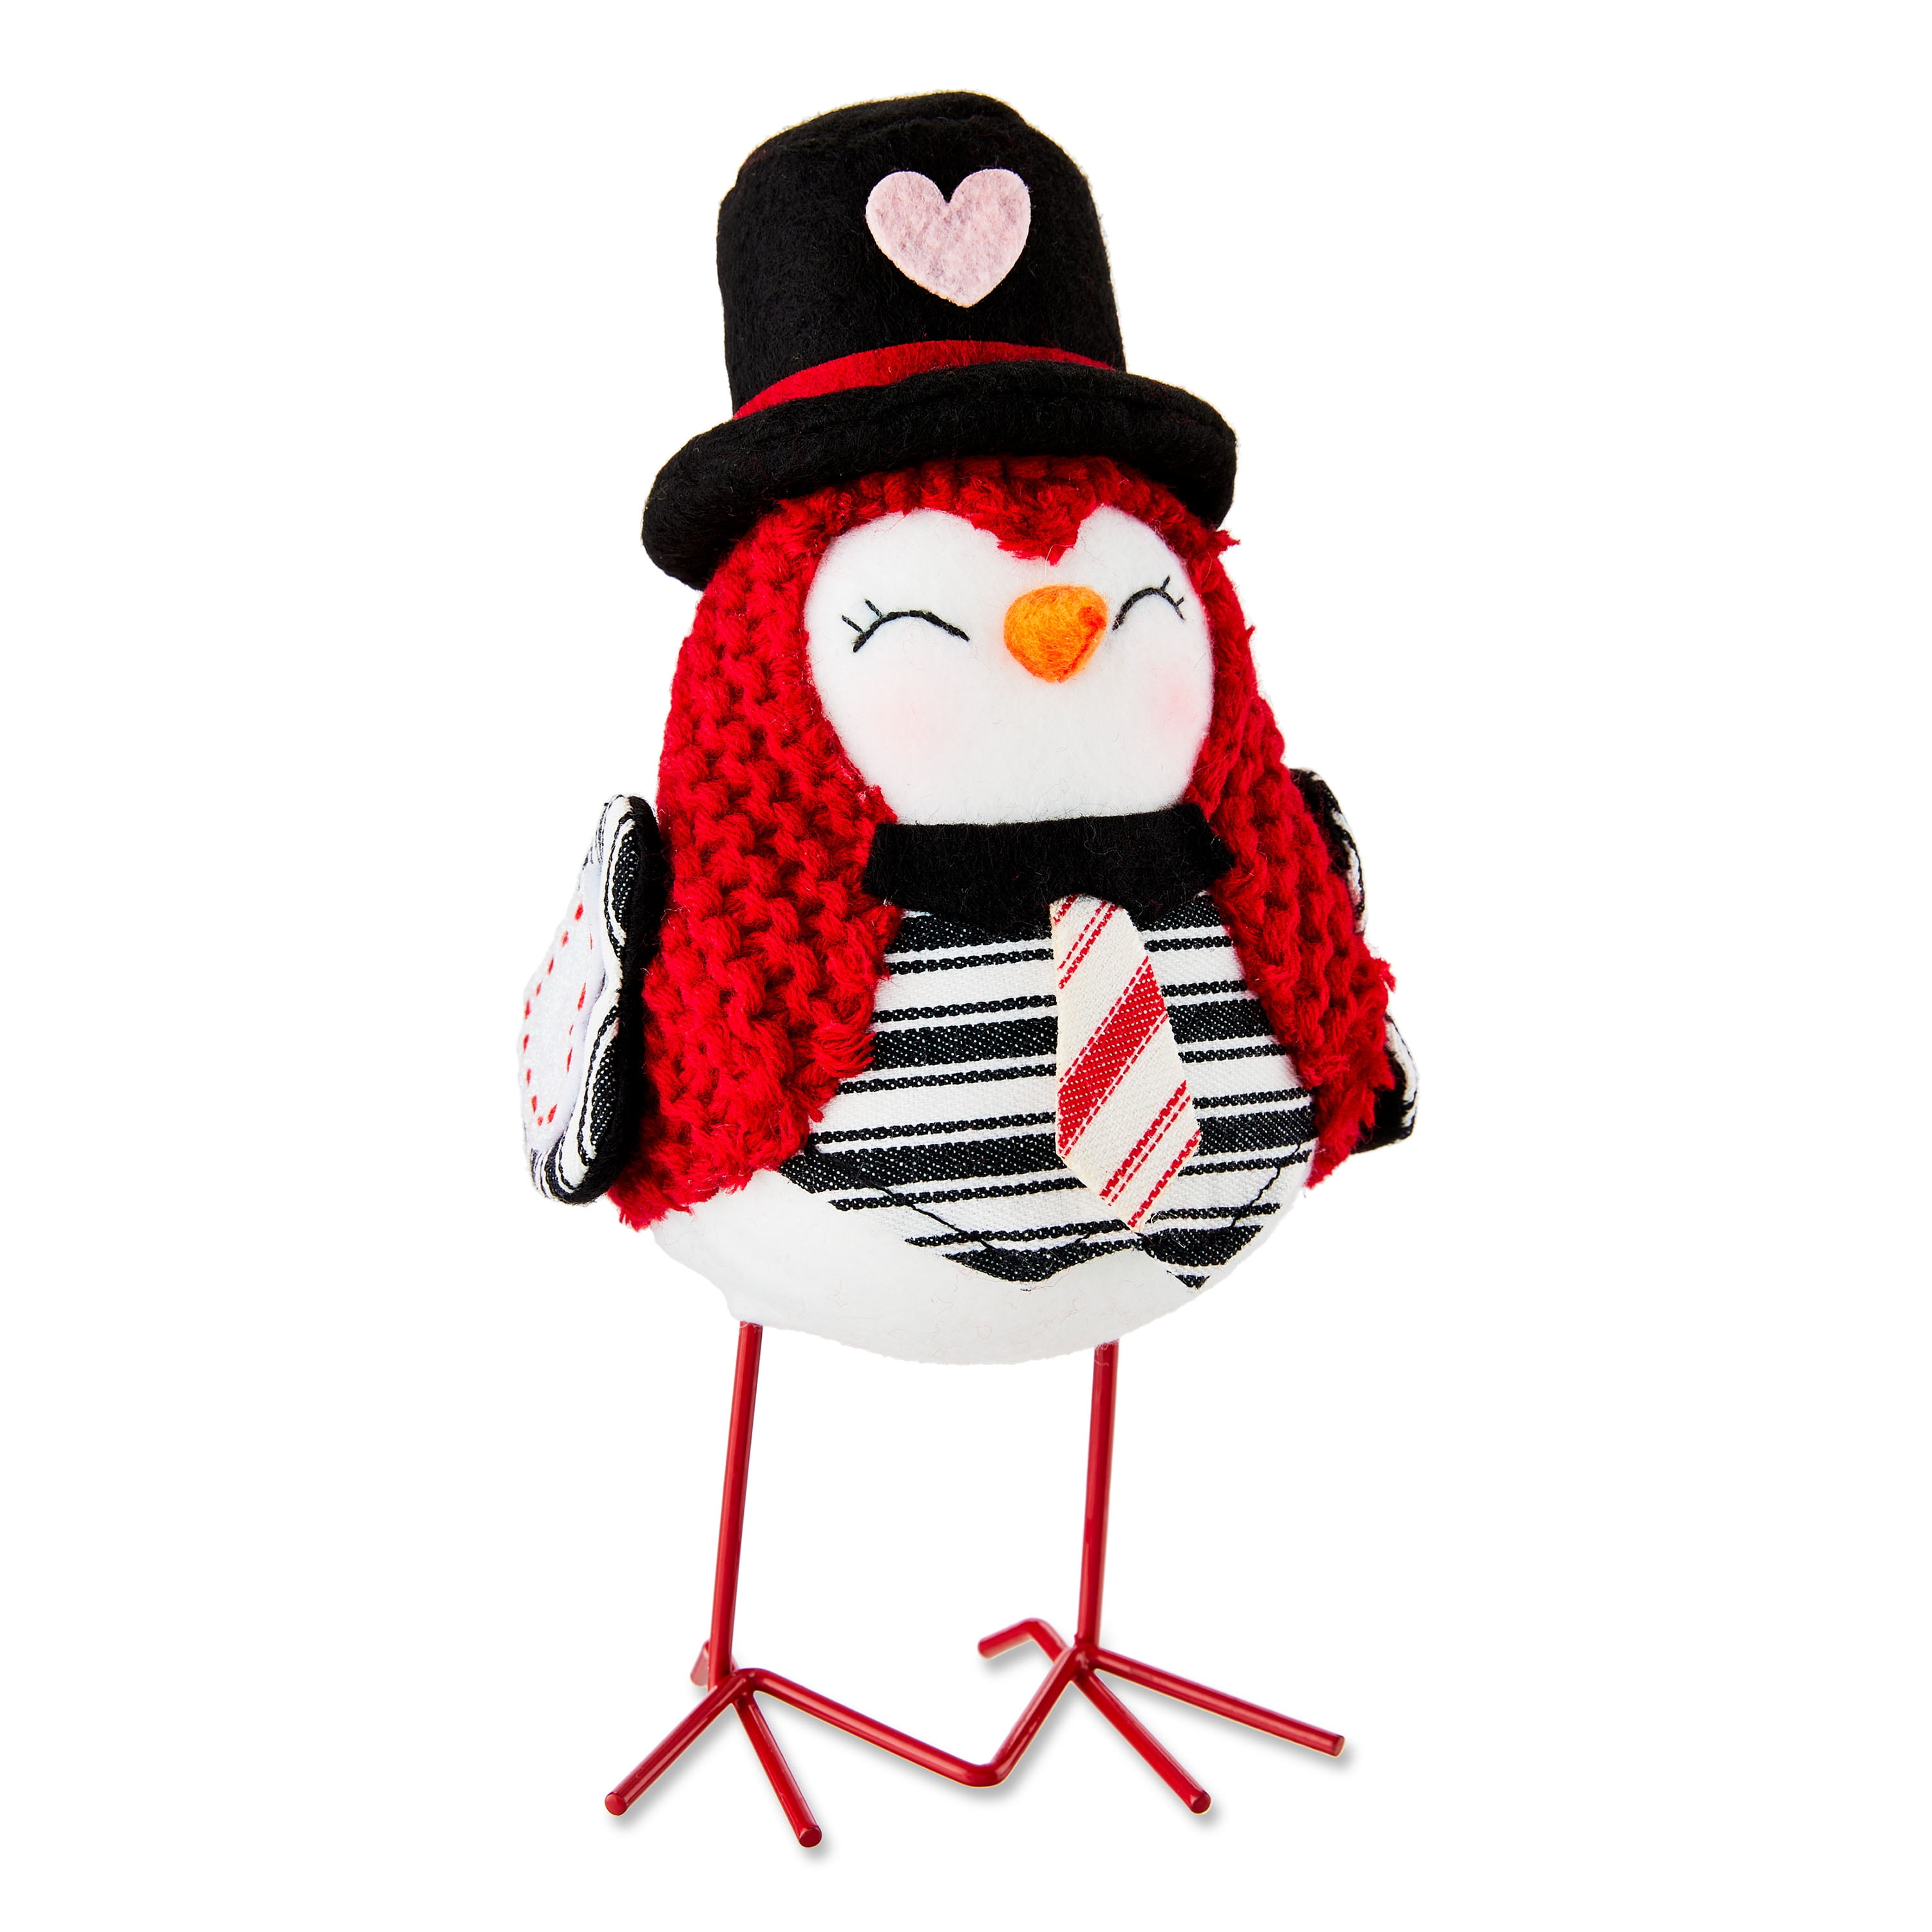 WAY TO CELEBRATE! Way To Celebrate Valentine's Day Fabric Bird with Black Hat Tabletop Decoration, 7"